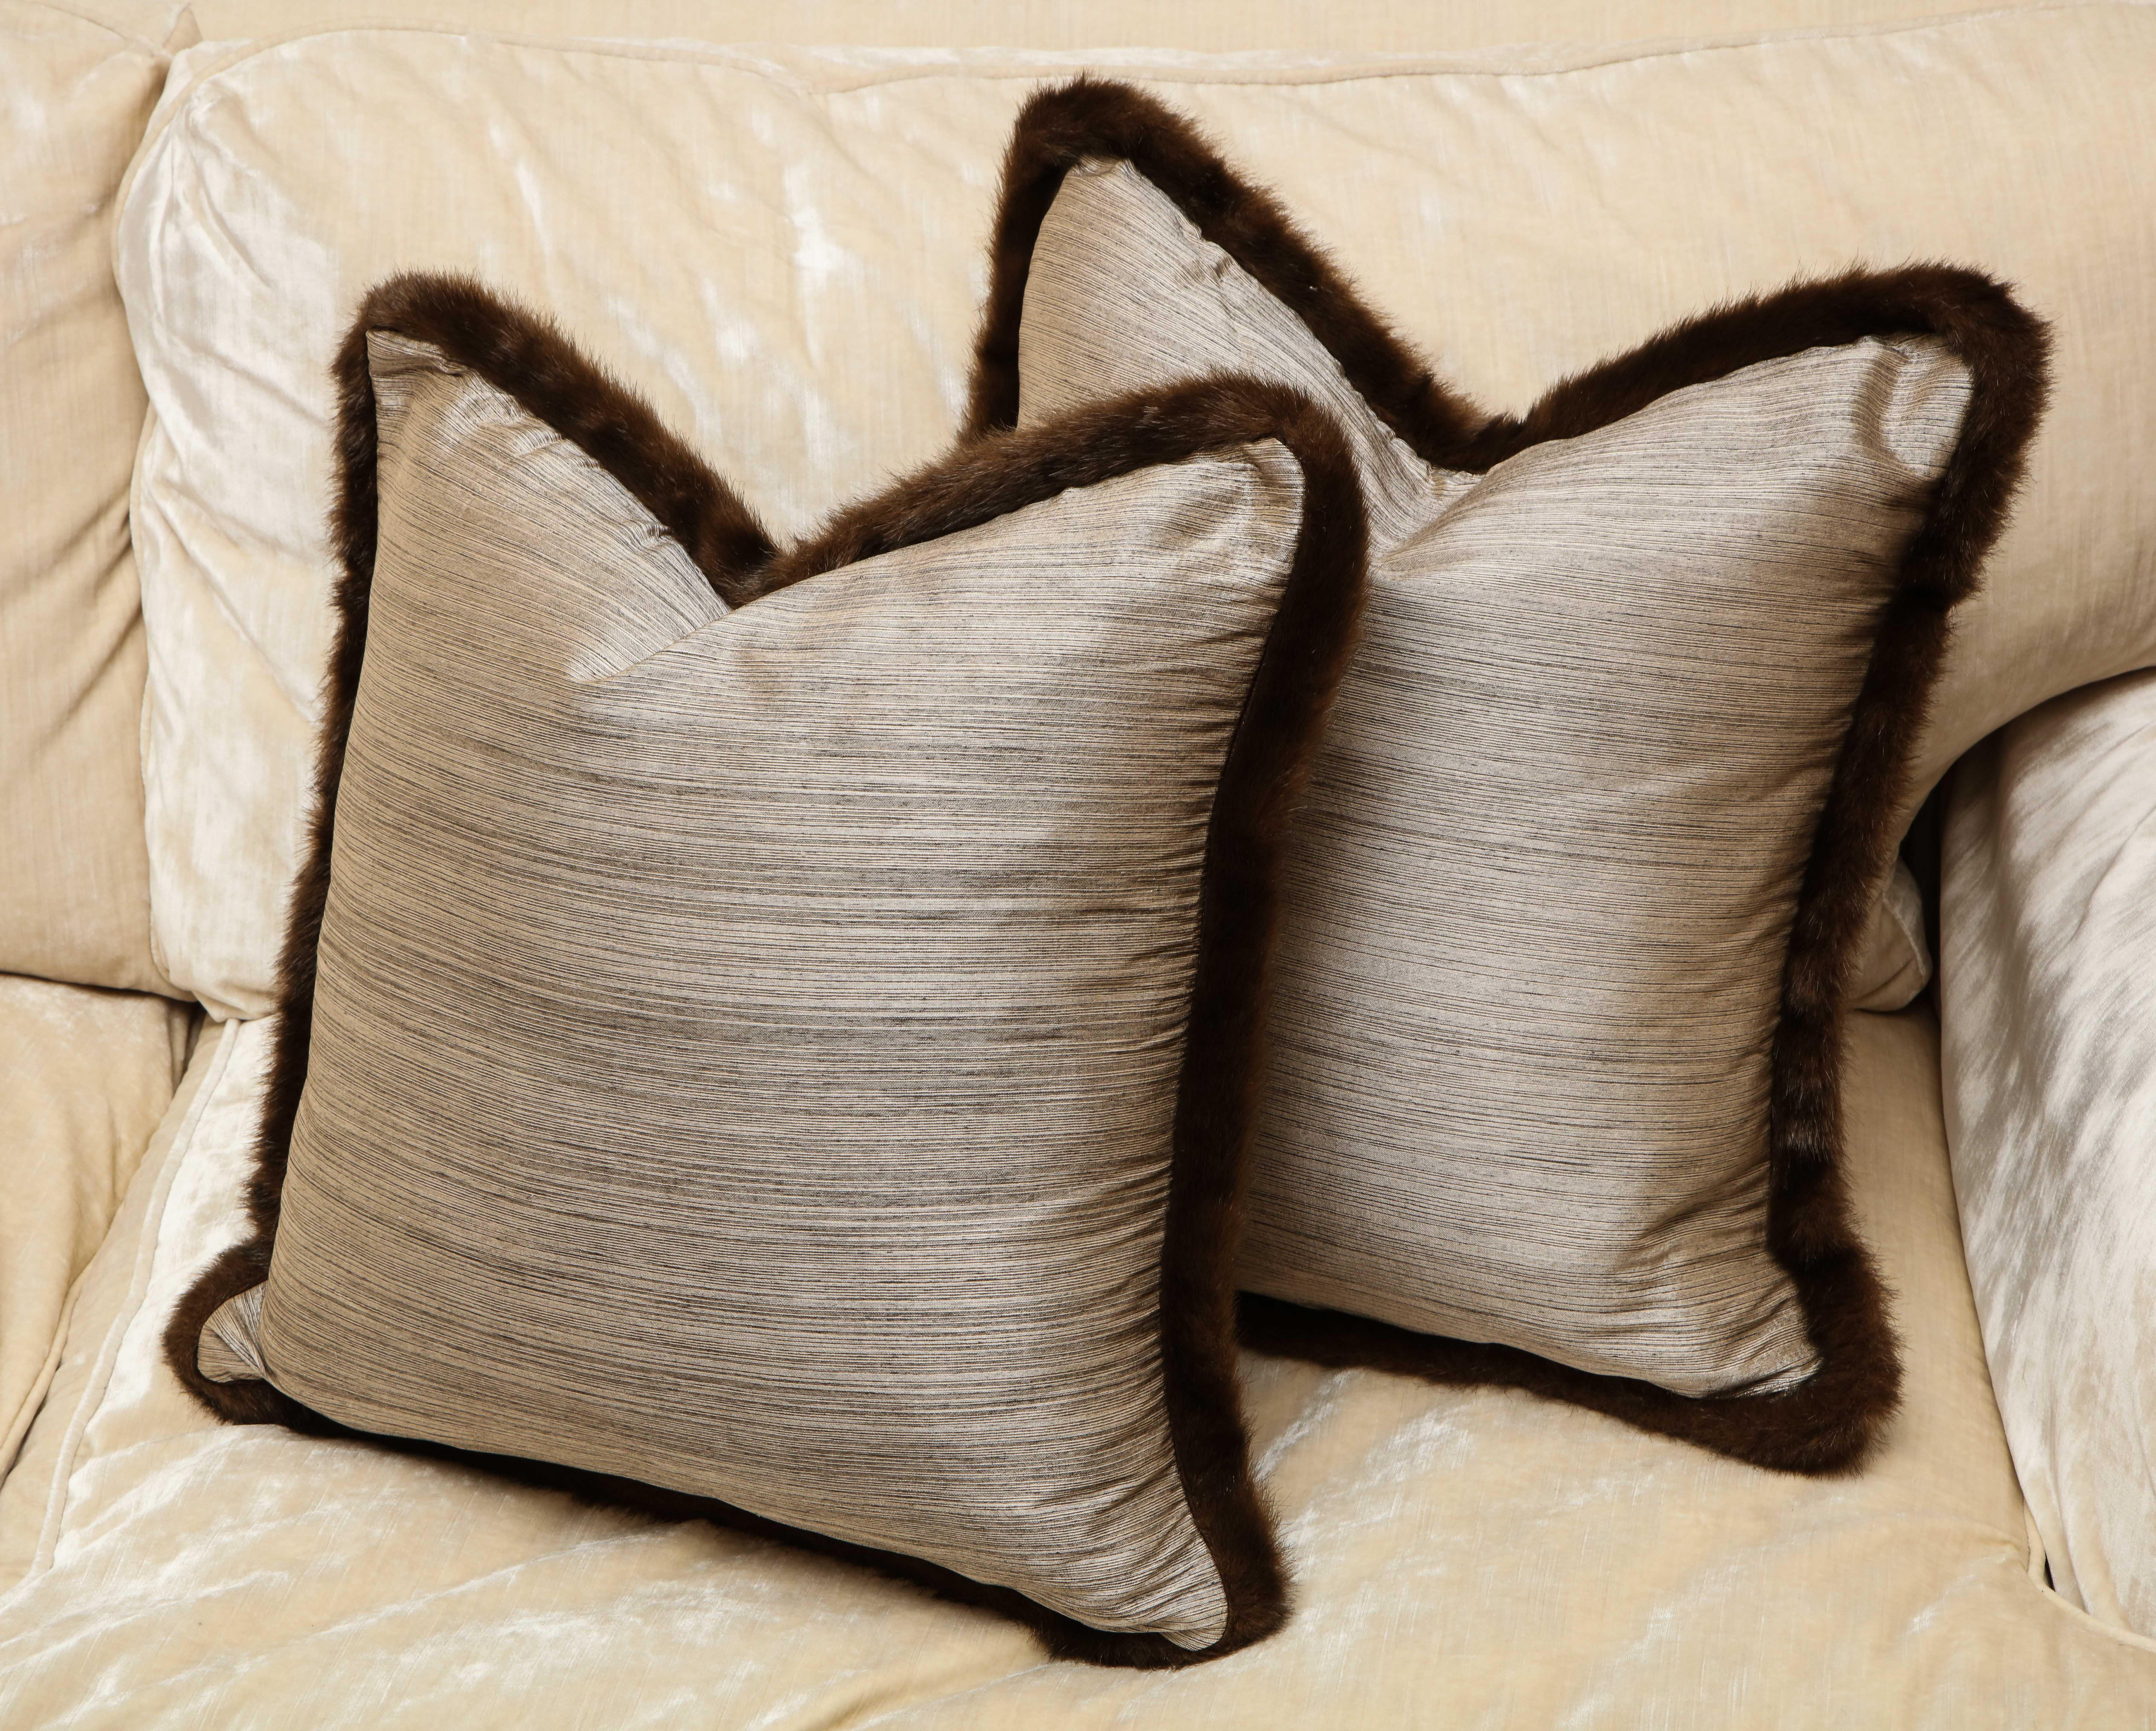 Pair of Silver and Bronze Silk and Fur Anglo-Japanese Pillow In New Condition For Sale In New York, NY